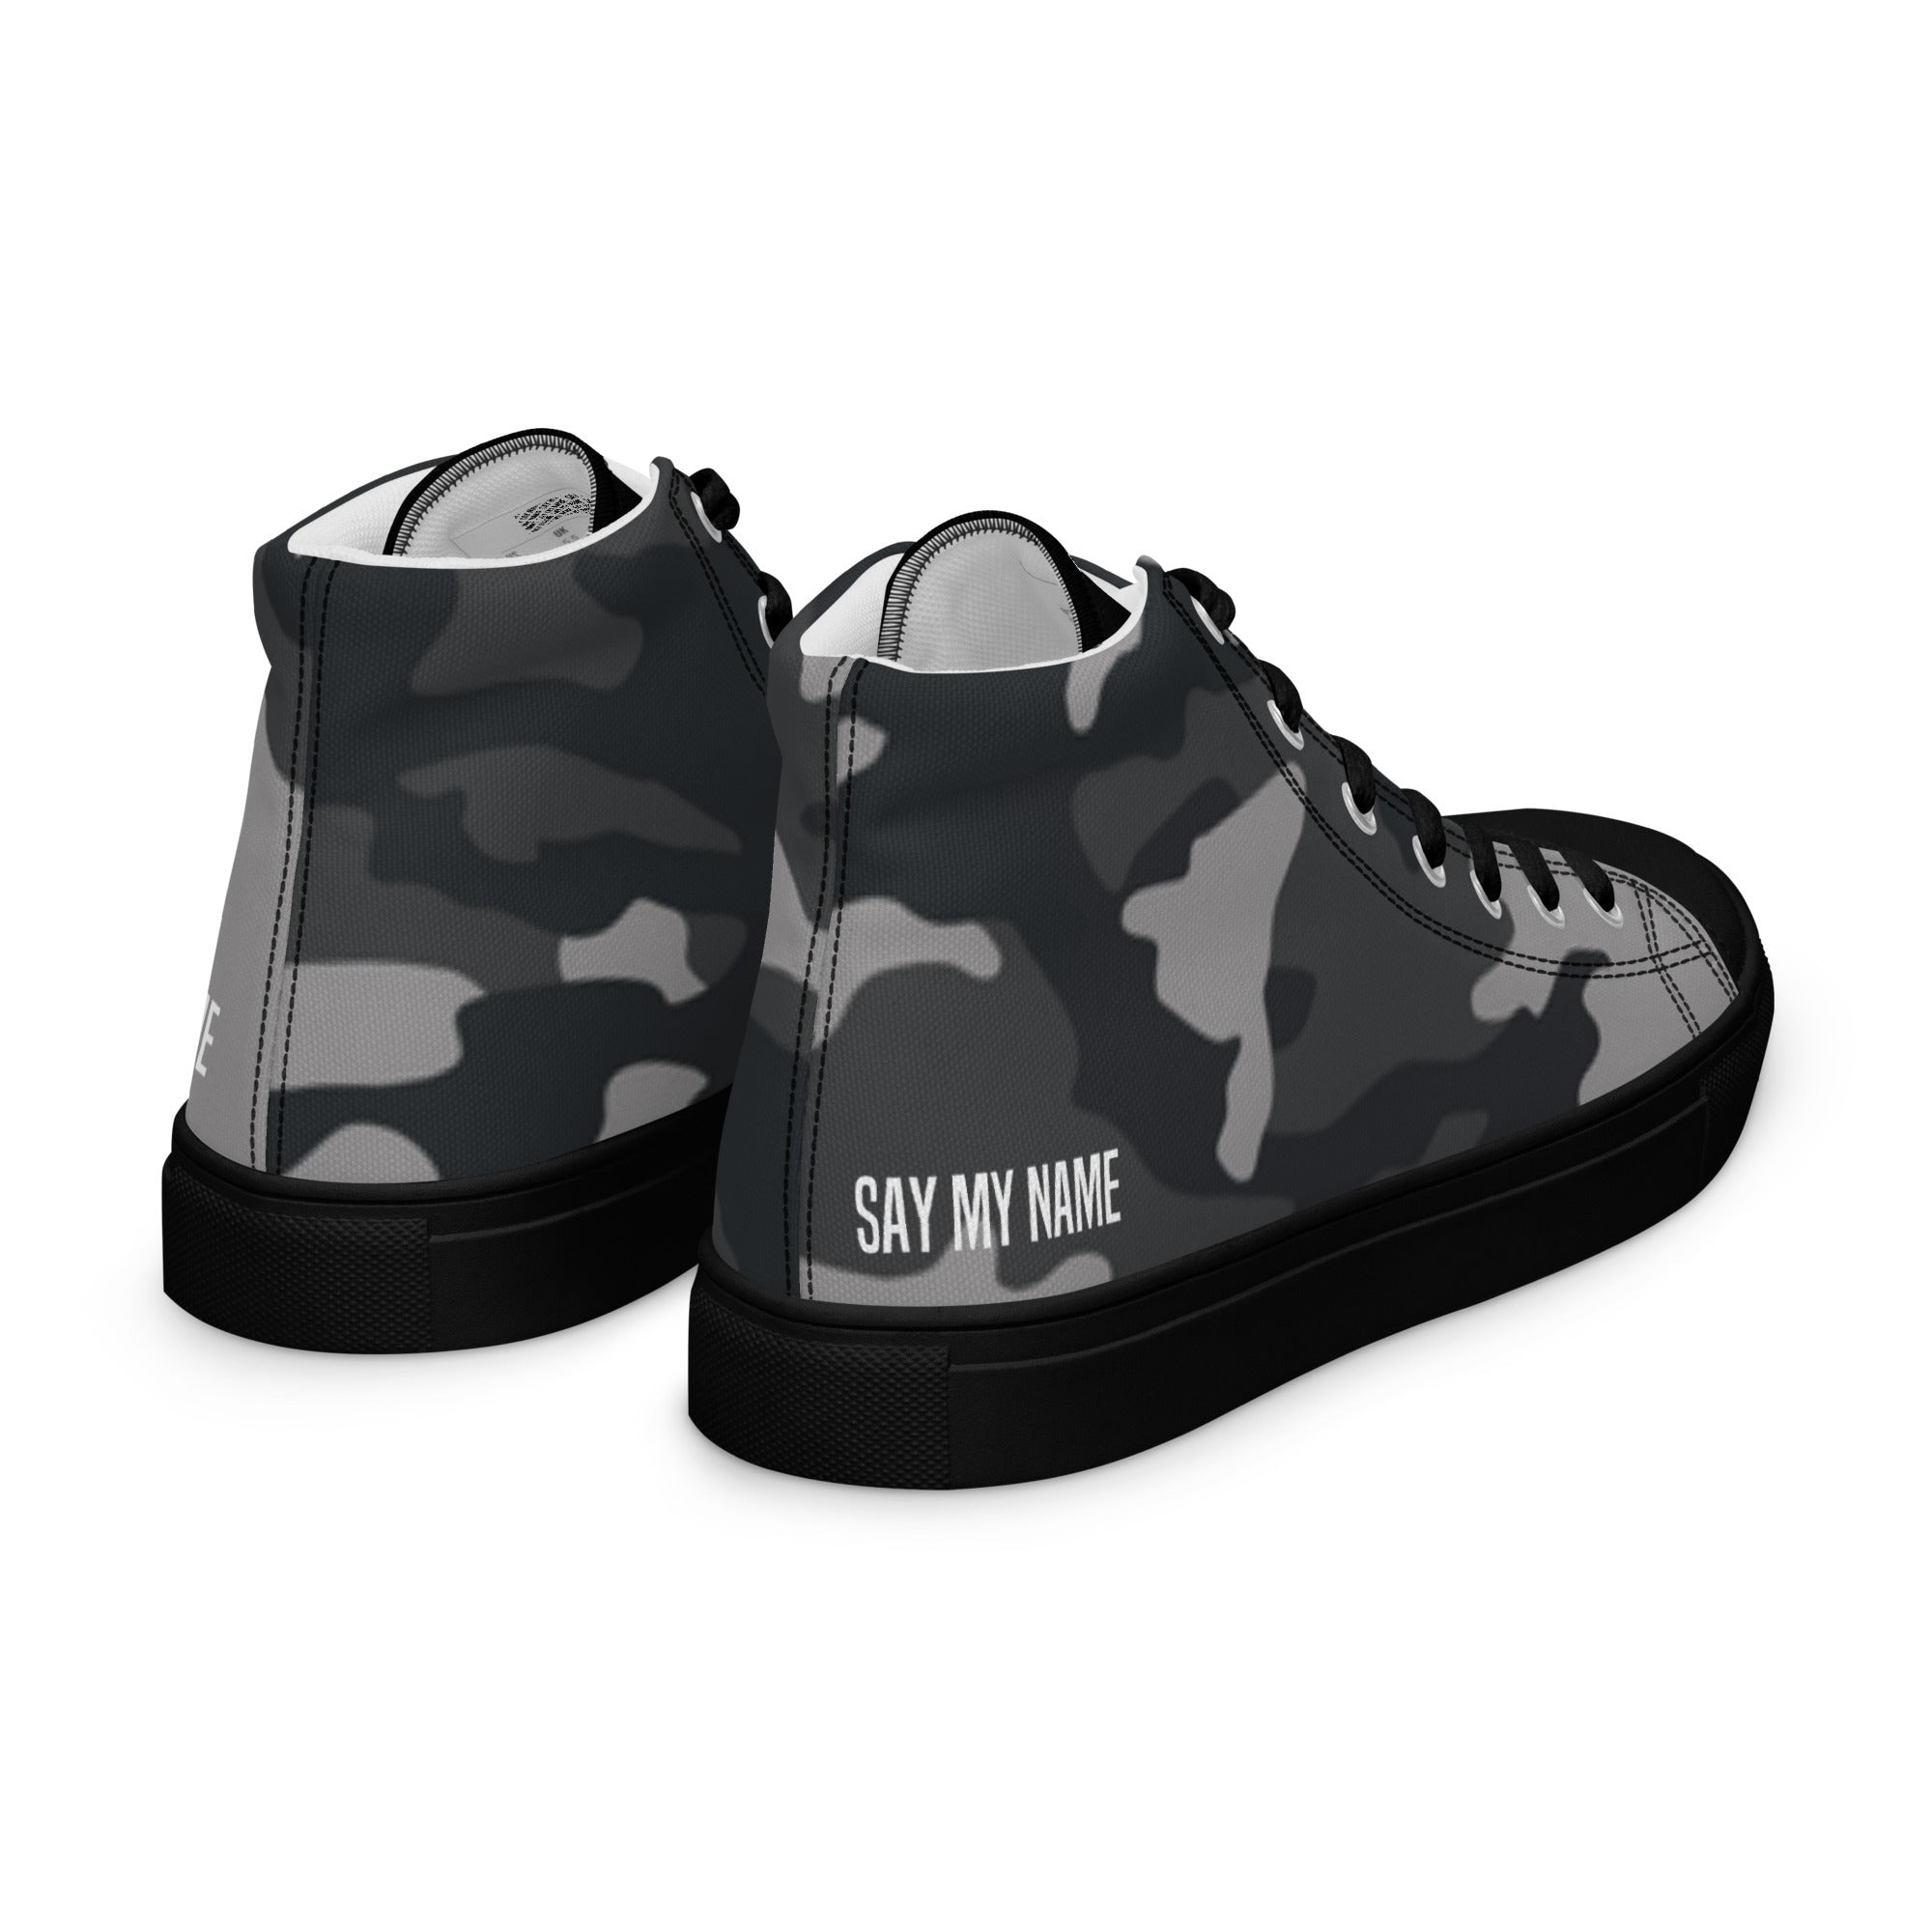 Baskets hautes camouflage gris en toile homme "SAY MY NAME"